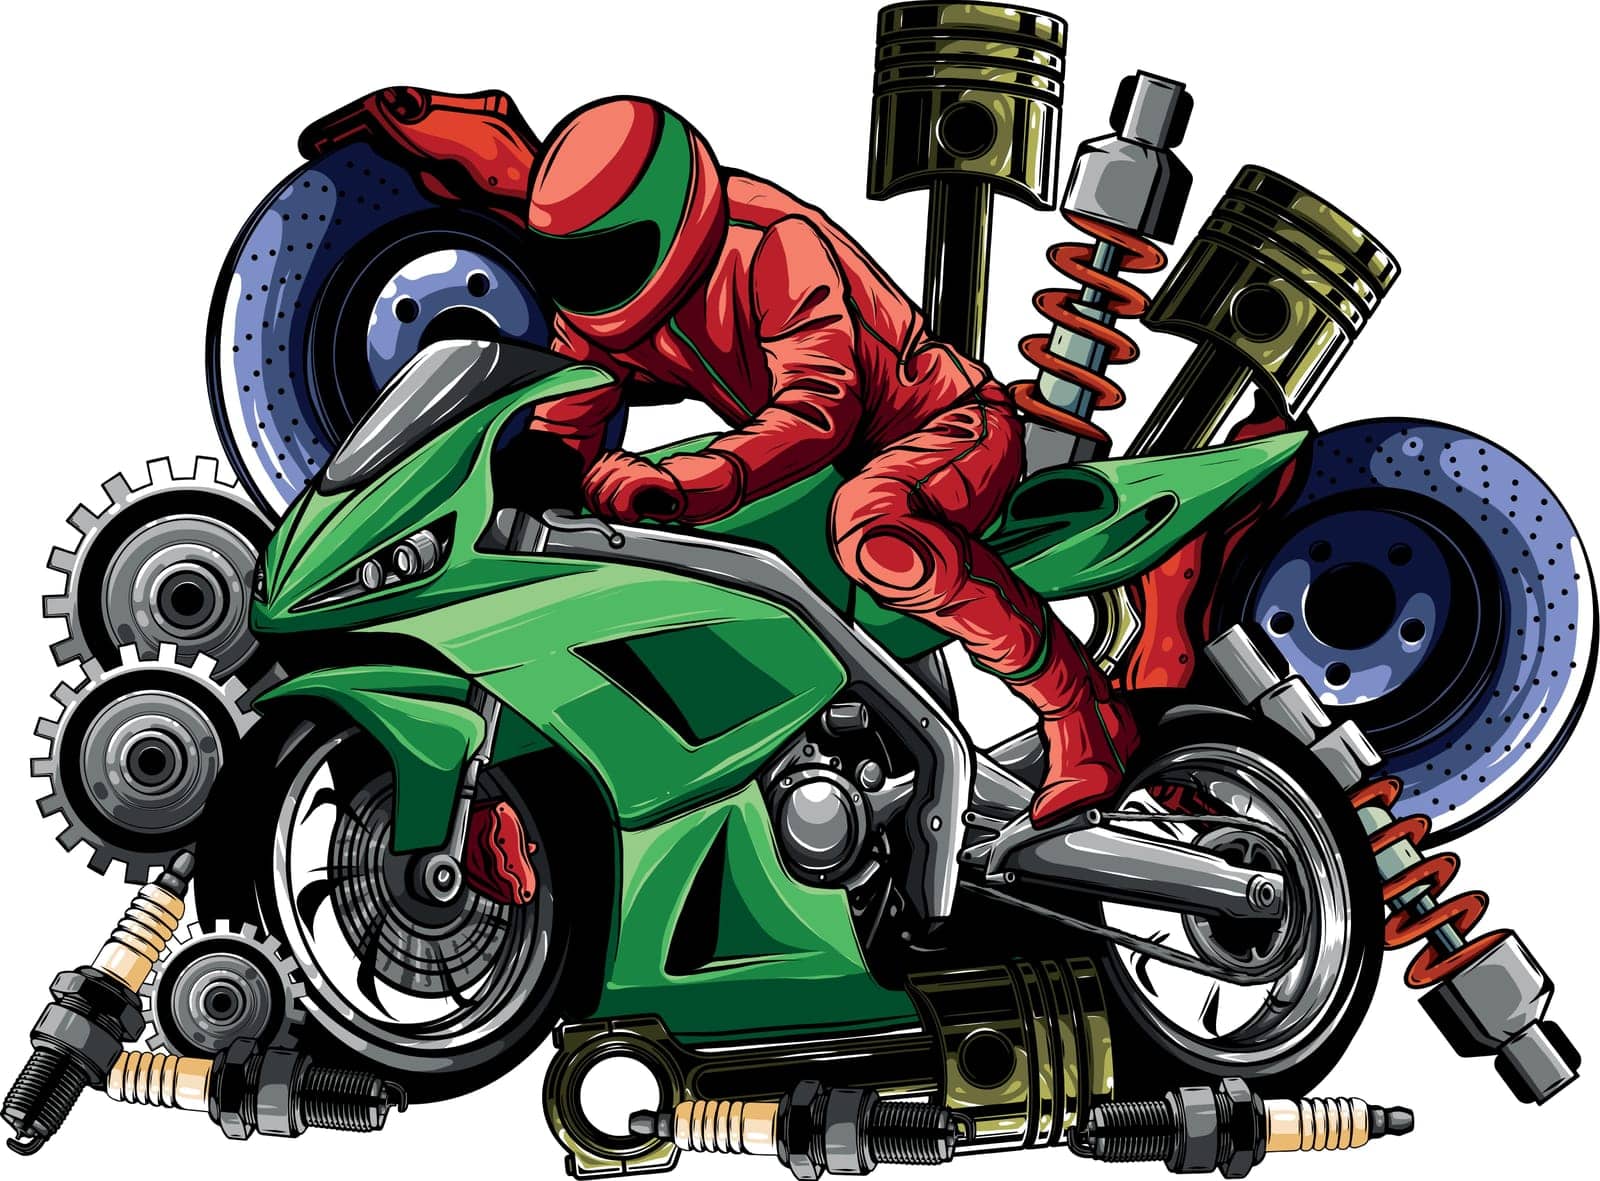 Vector illustration of motorbike with Spares design by dean